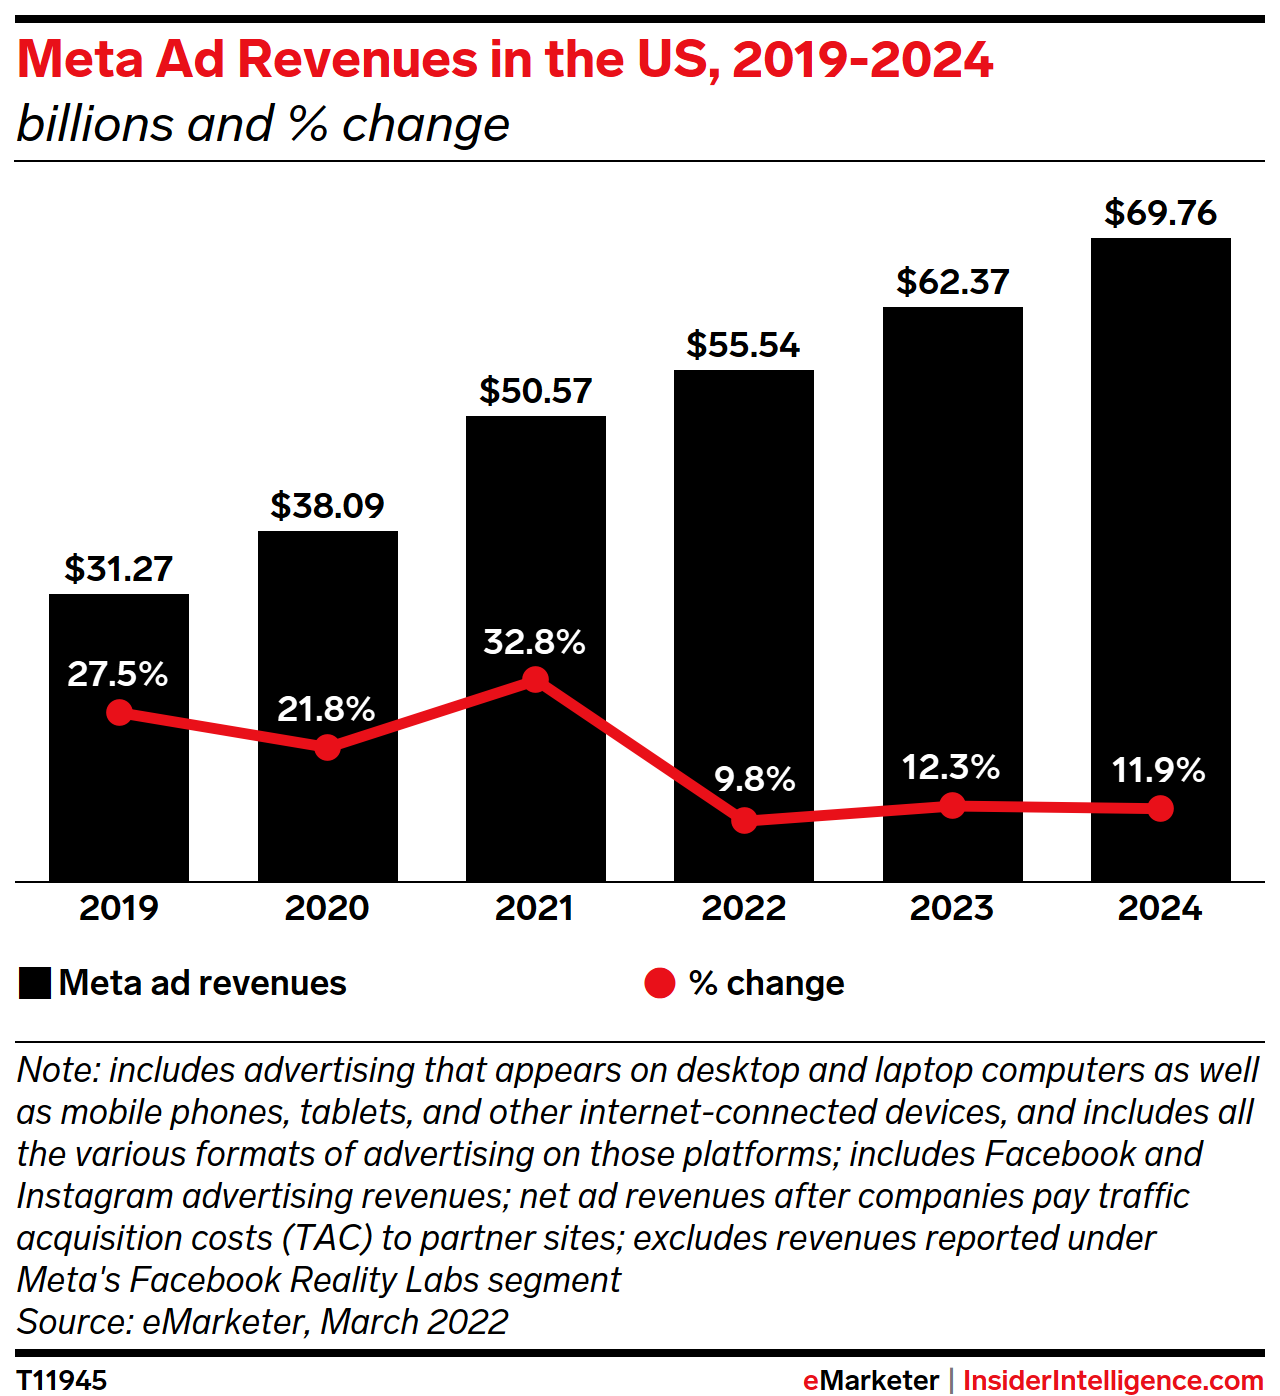 Meta Ad Revenues in the US, 2019-2024 (billions and % change)